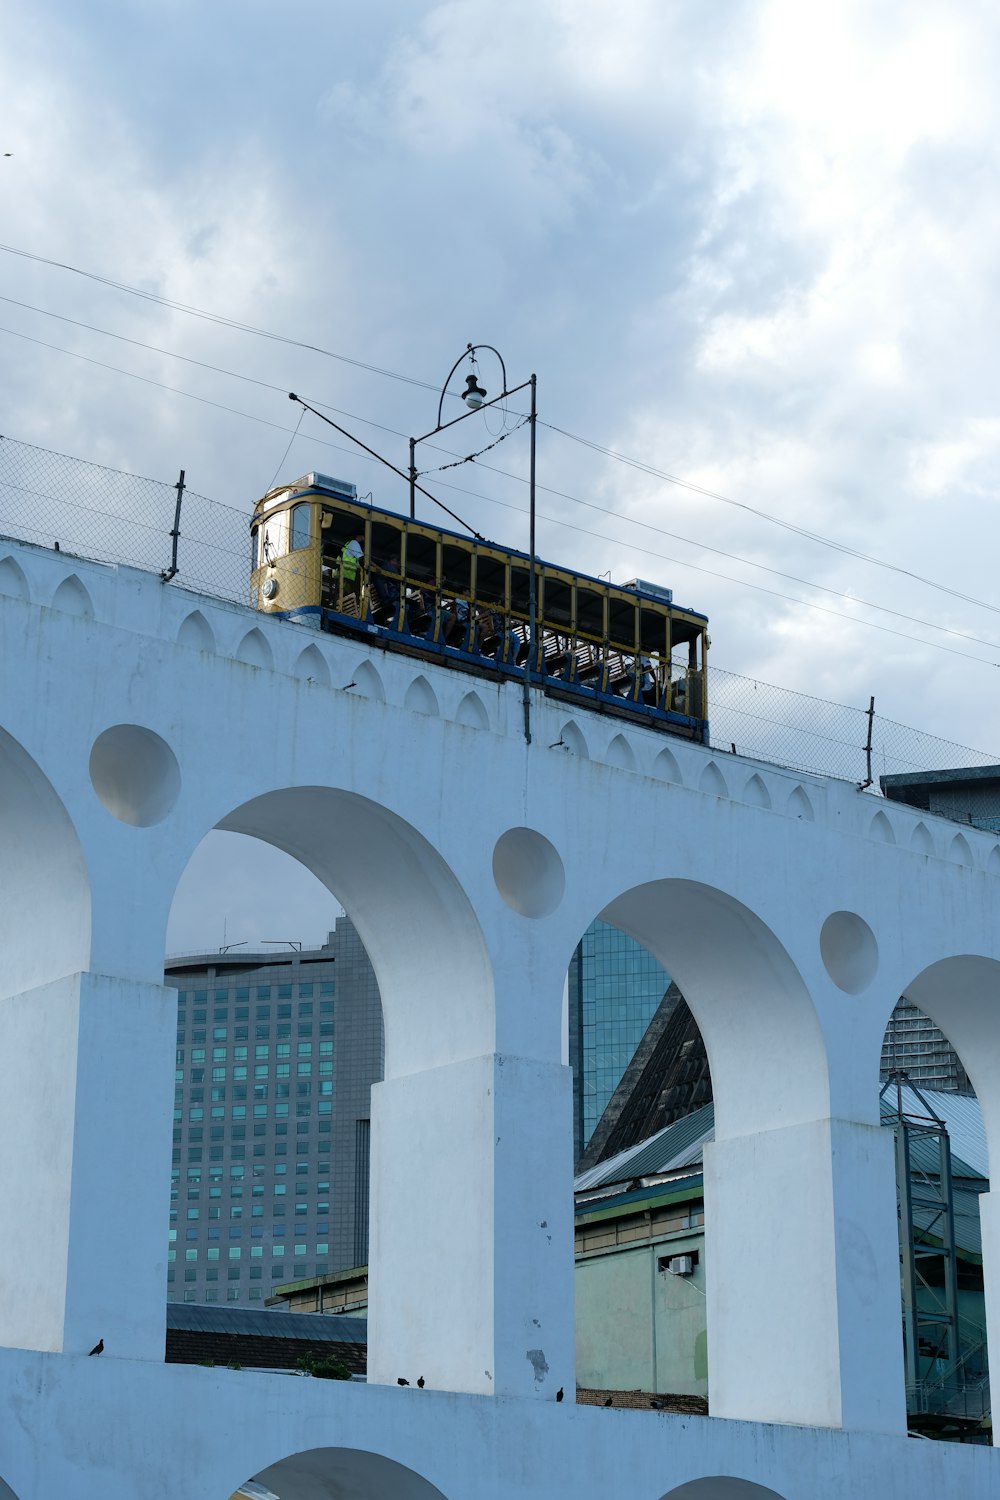 a train traveling over a bridge with arches